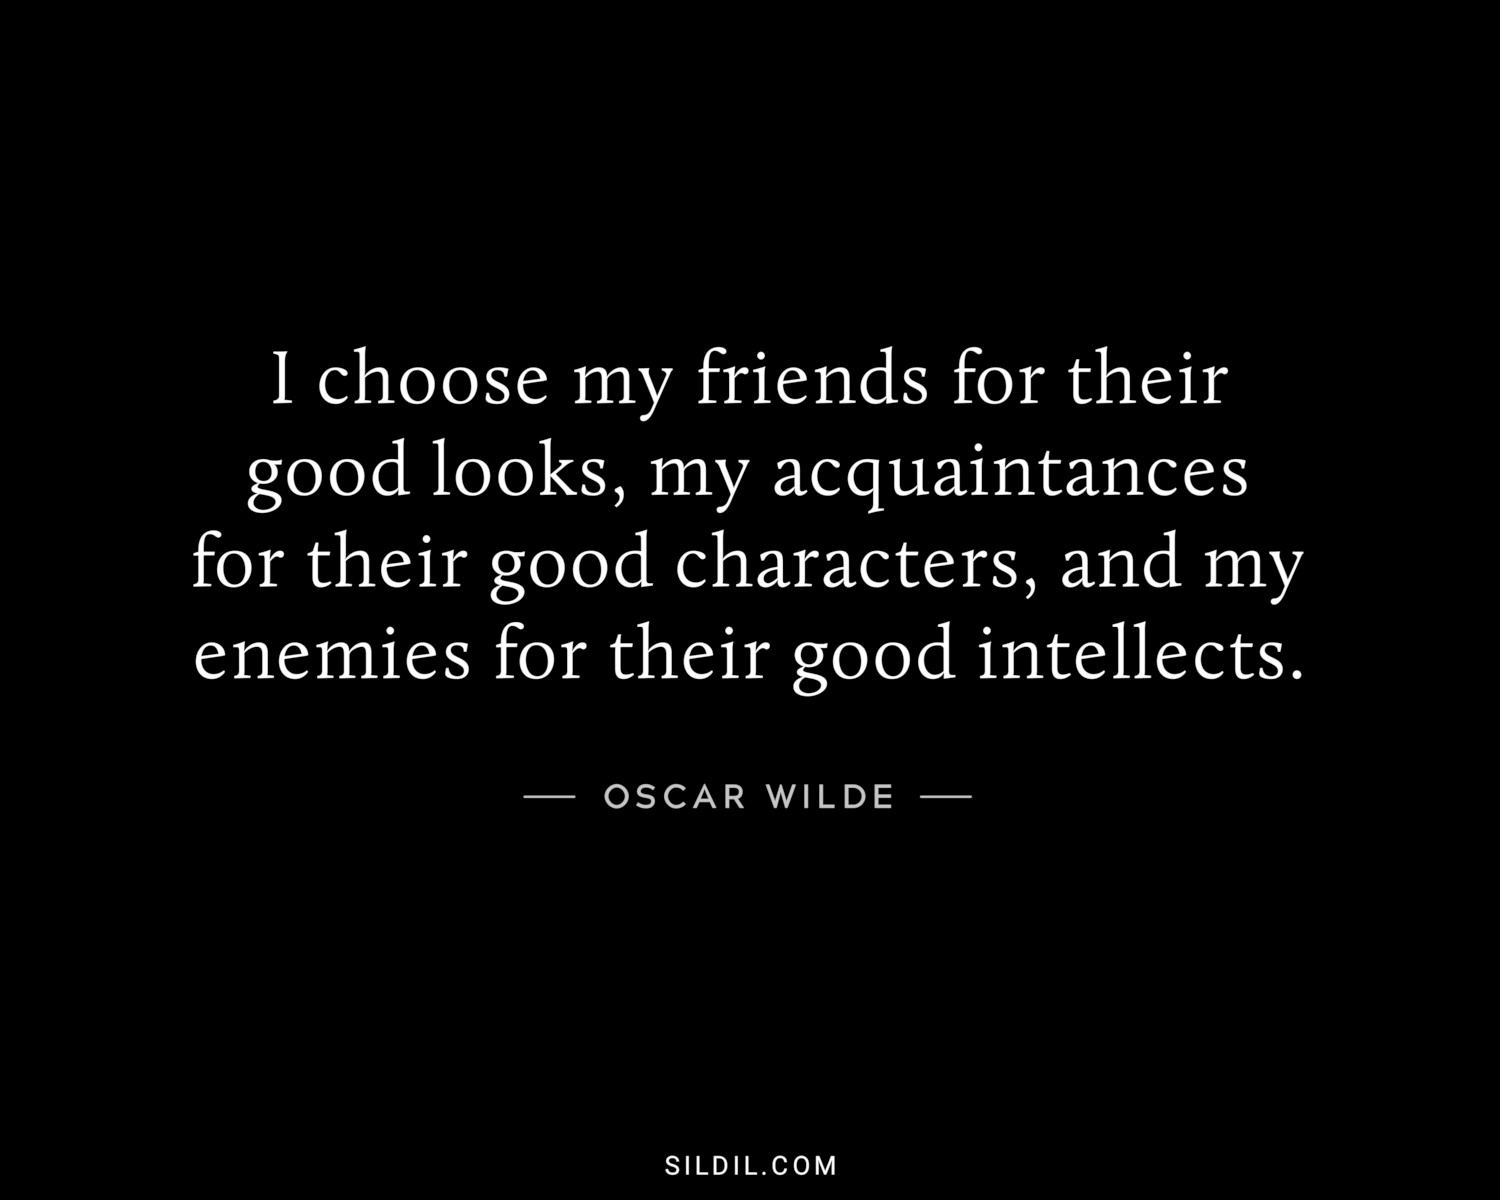 I choose my friends for their good looks, my acquaintances for their good characters, and my enemies for their good intellects.